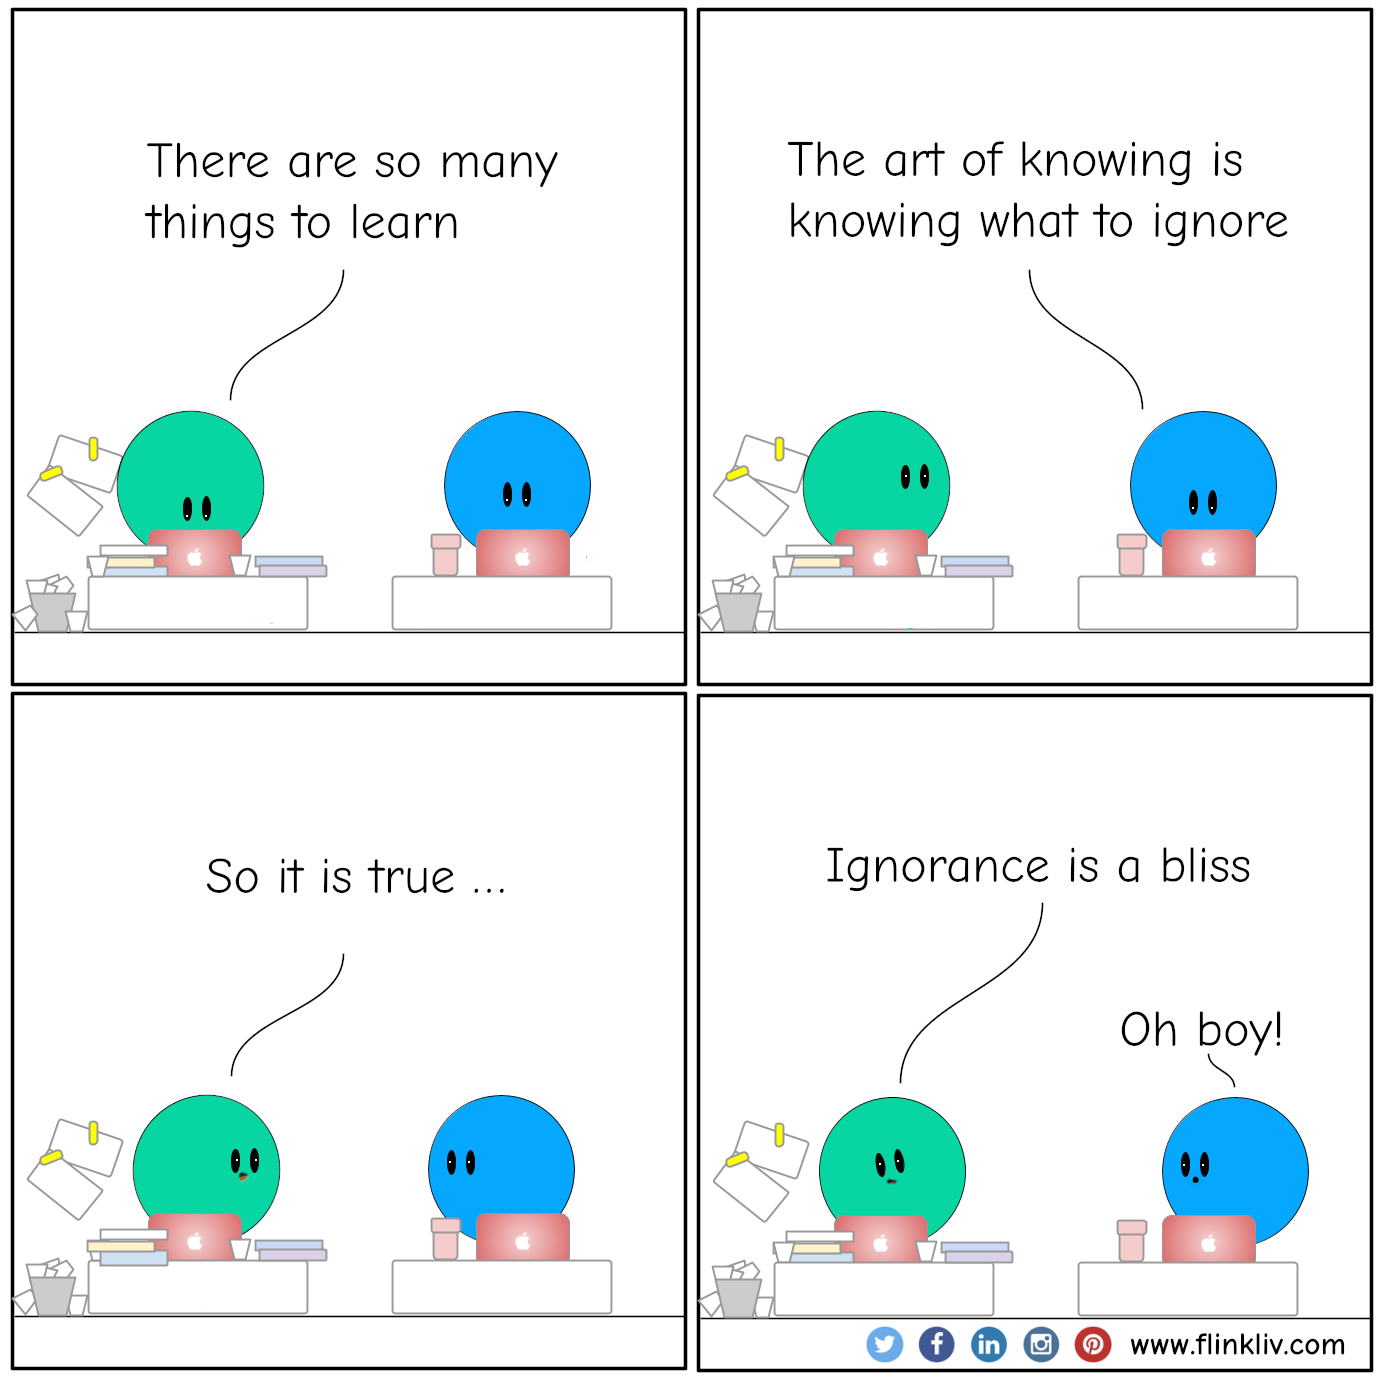 Conversation between A and B about the art of knowing is knowing what to ignore A: There are so many things to learn B: The art of knowing is knowing what to ignore. A: So it is true A: Ignorance is a bliss B: Oh boy!